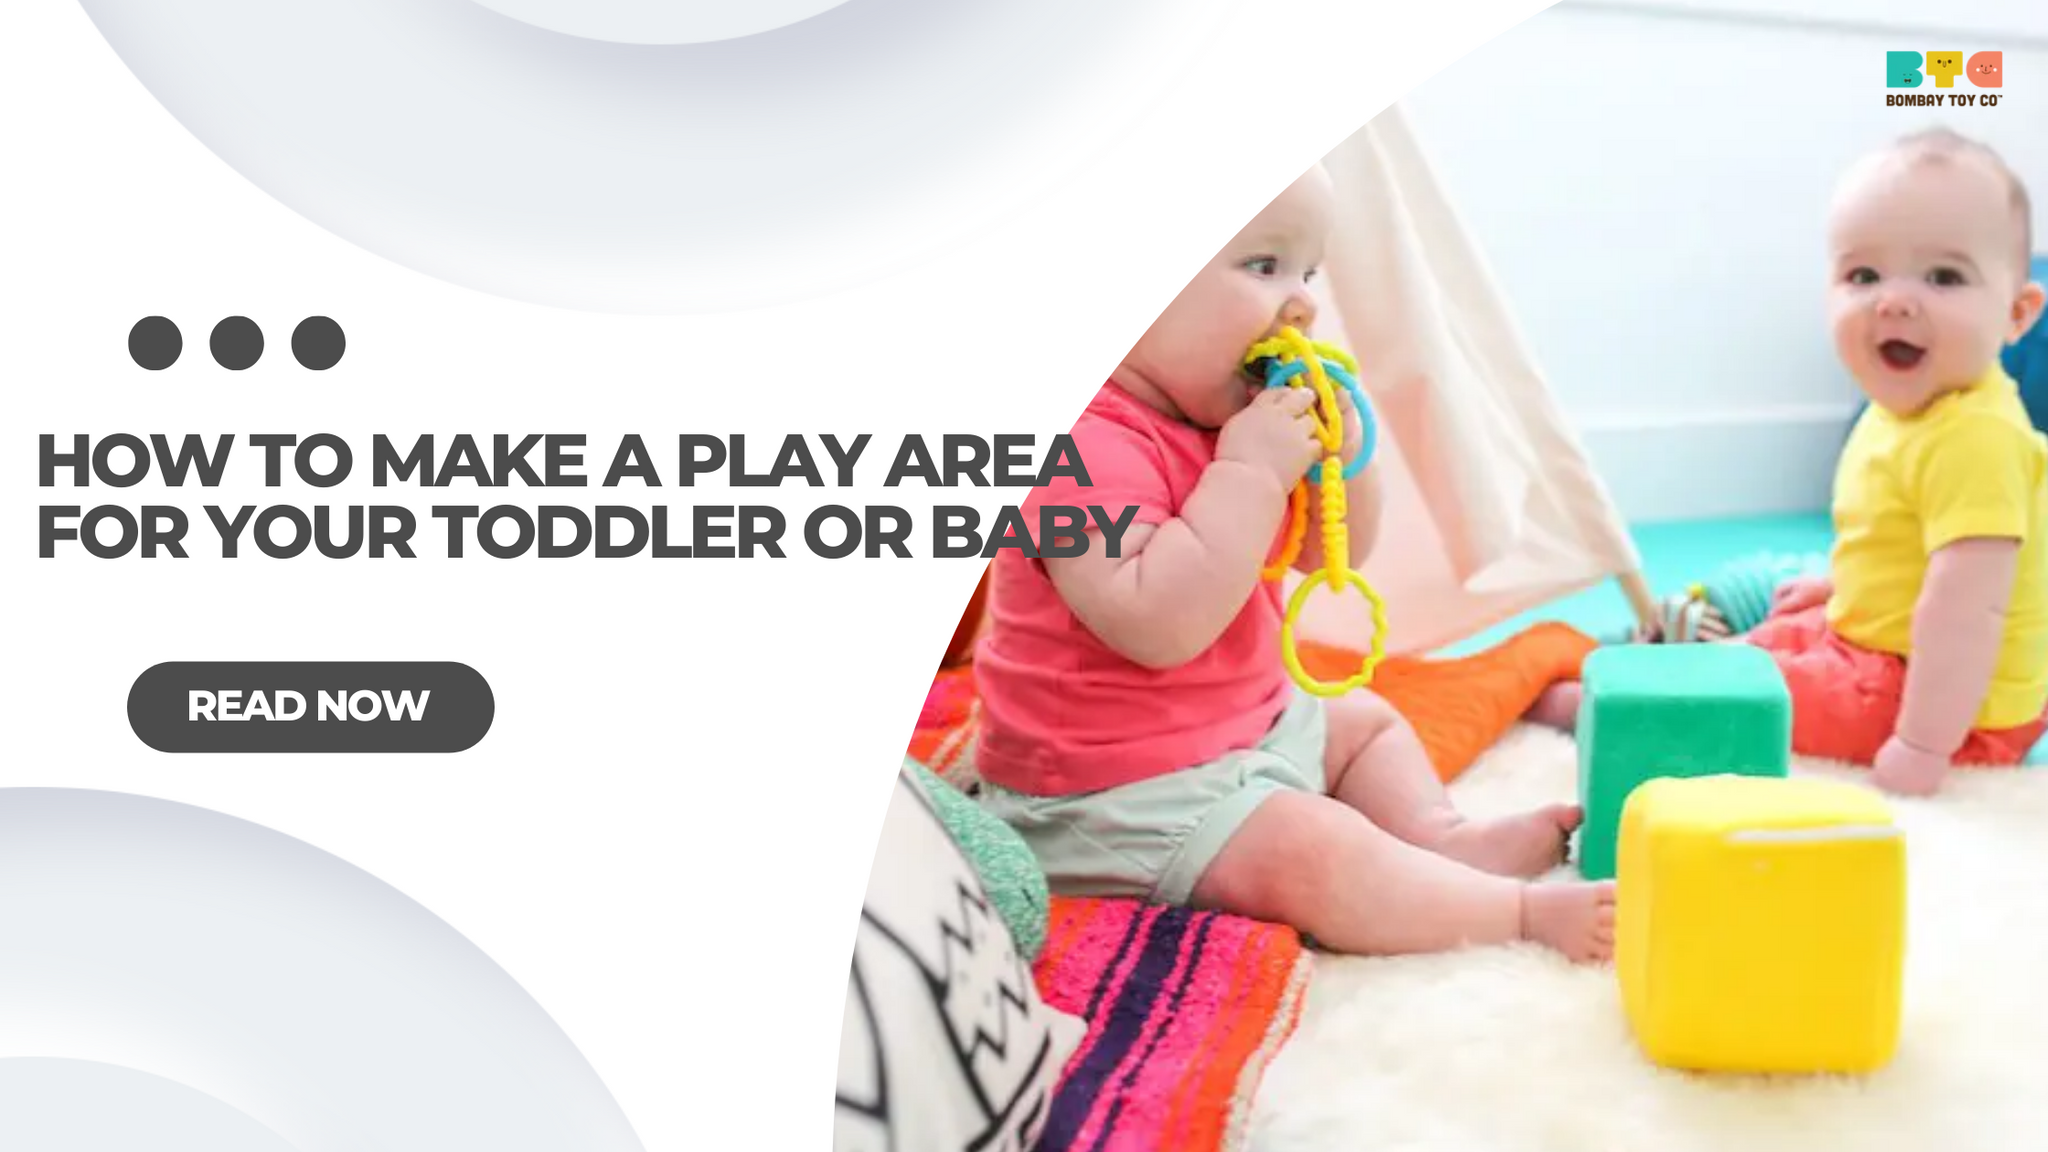 Baby's Play Area: How to Make a Play Area for Your Toddler or Baby